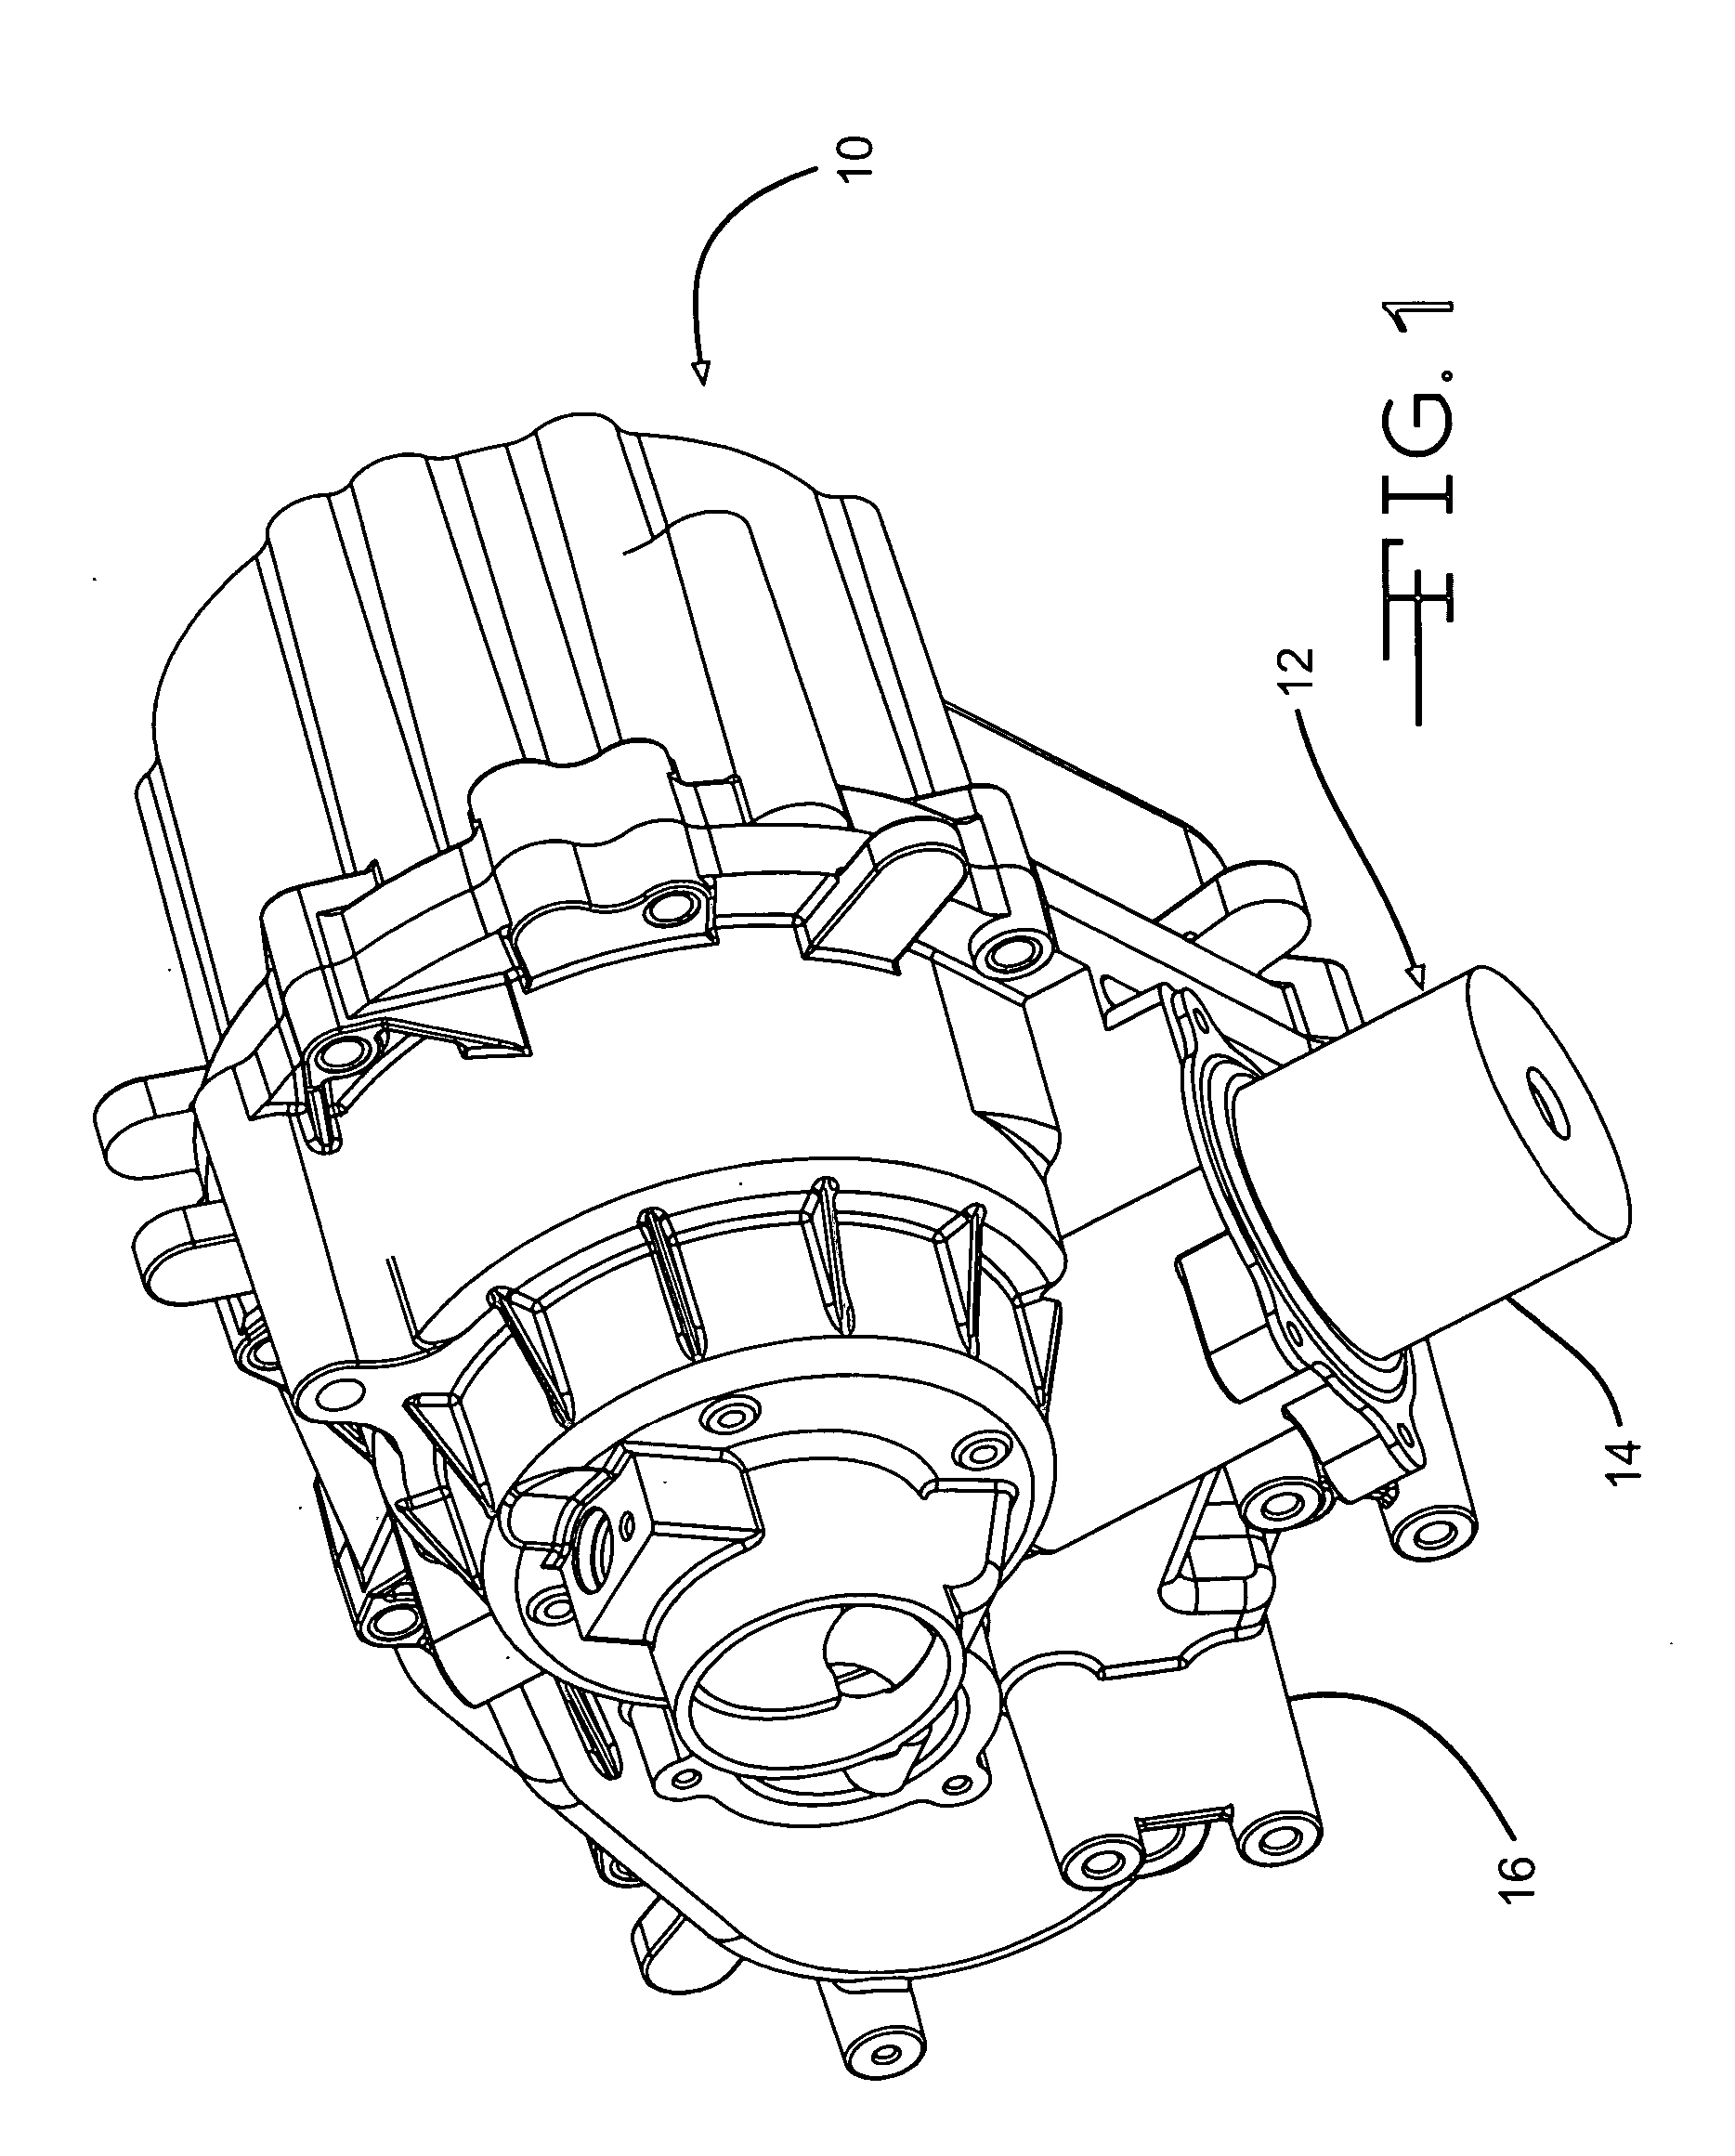 Transfer case with moving coil clutch actuator operator